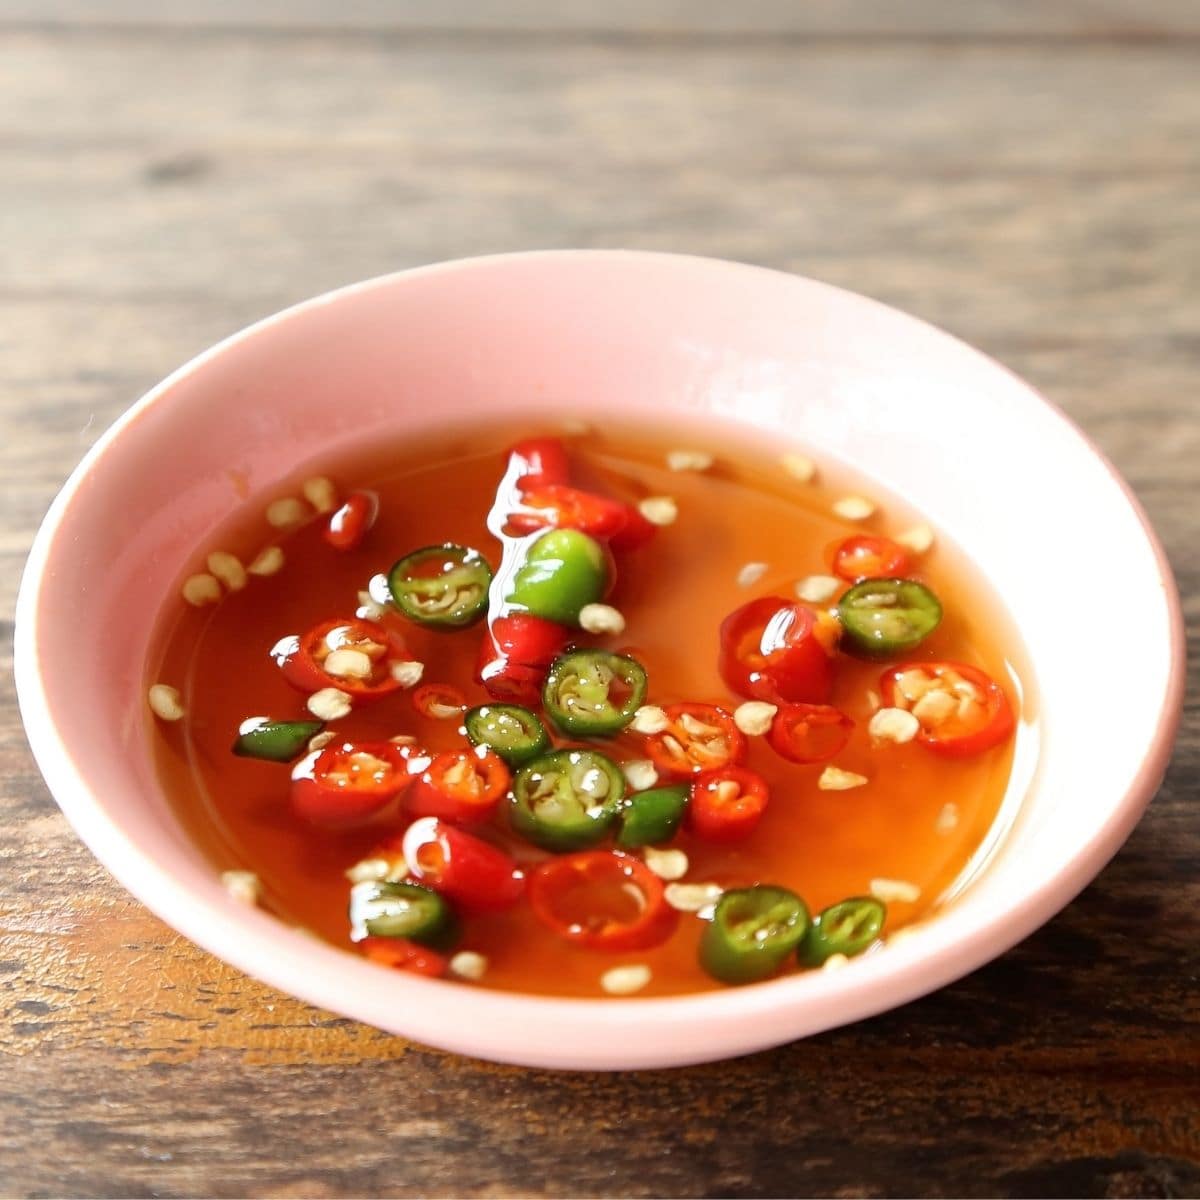 10 Fish Sauce Substitutes ( Best Alternatives to Try)